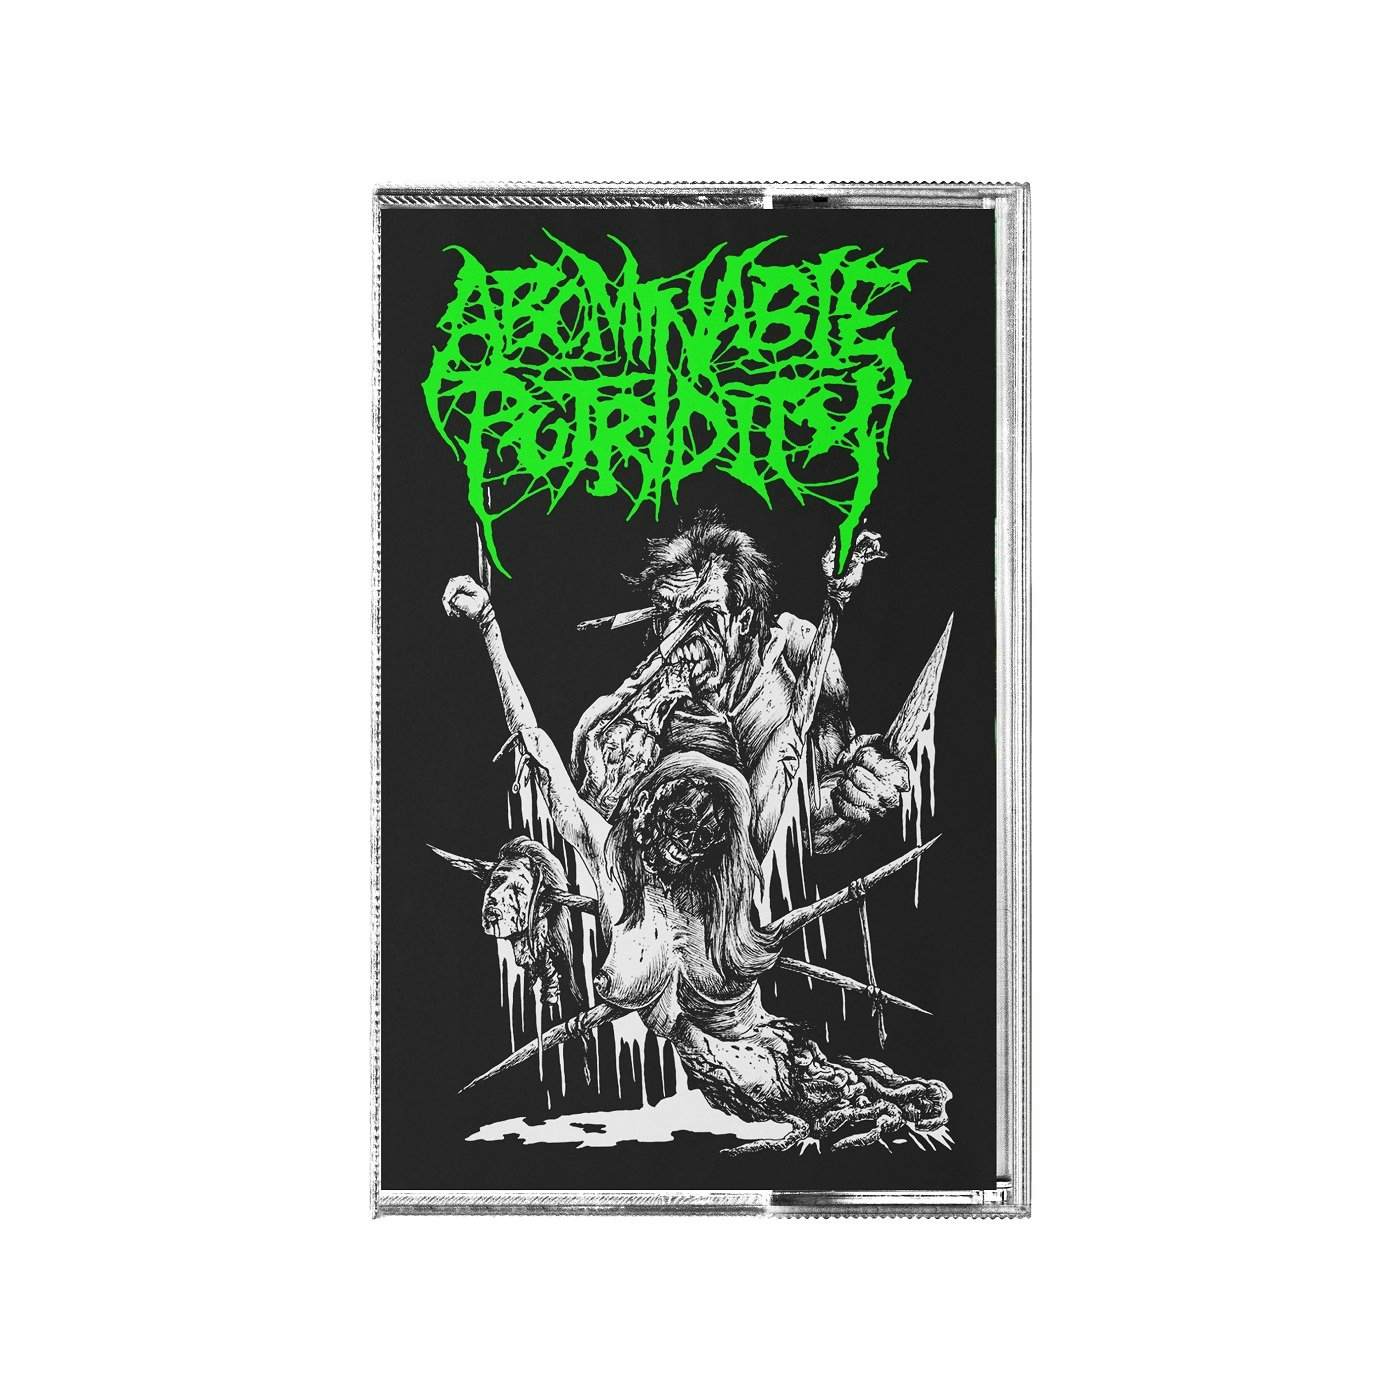 Abominable Putridity "Promo 2006 (Green)" Cassette